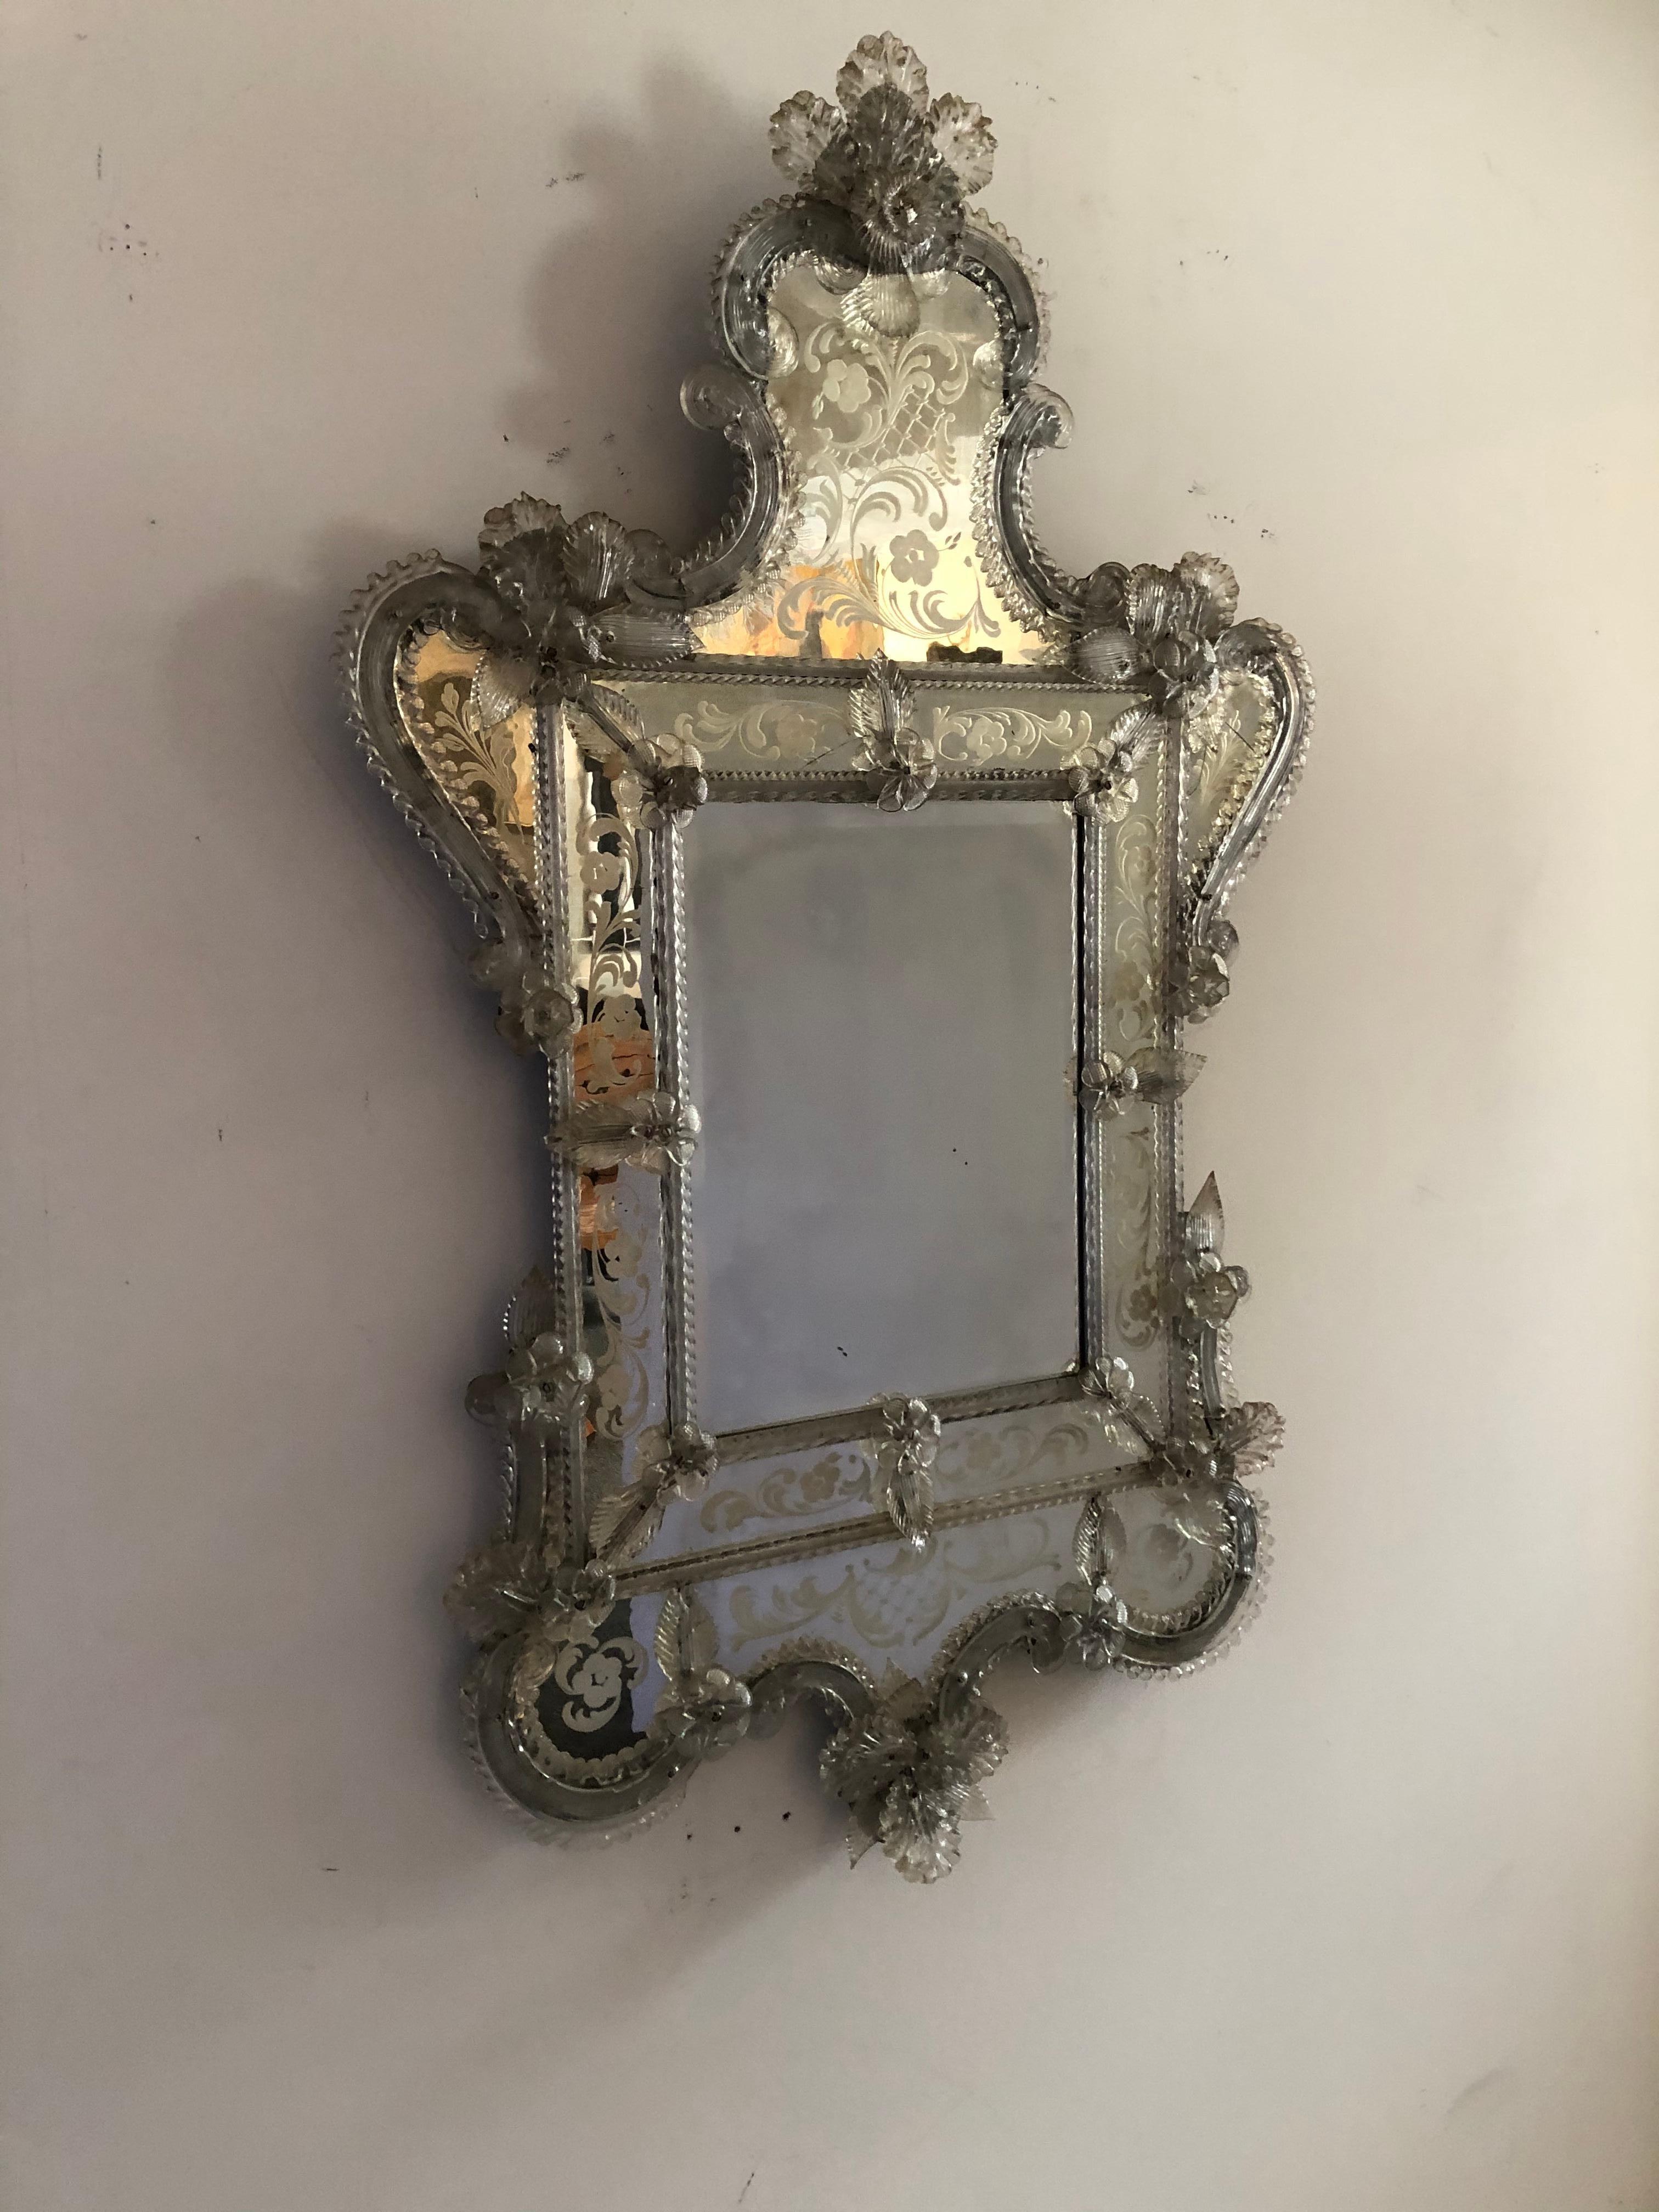 Hand-Crafted Venetian Antique Ornate Etched Decorative Mirror For Sale